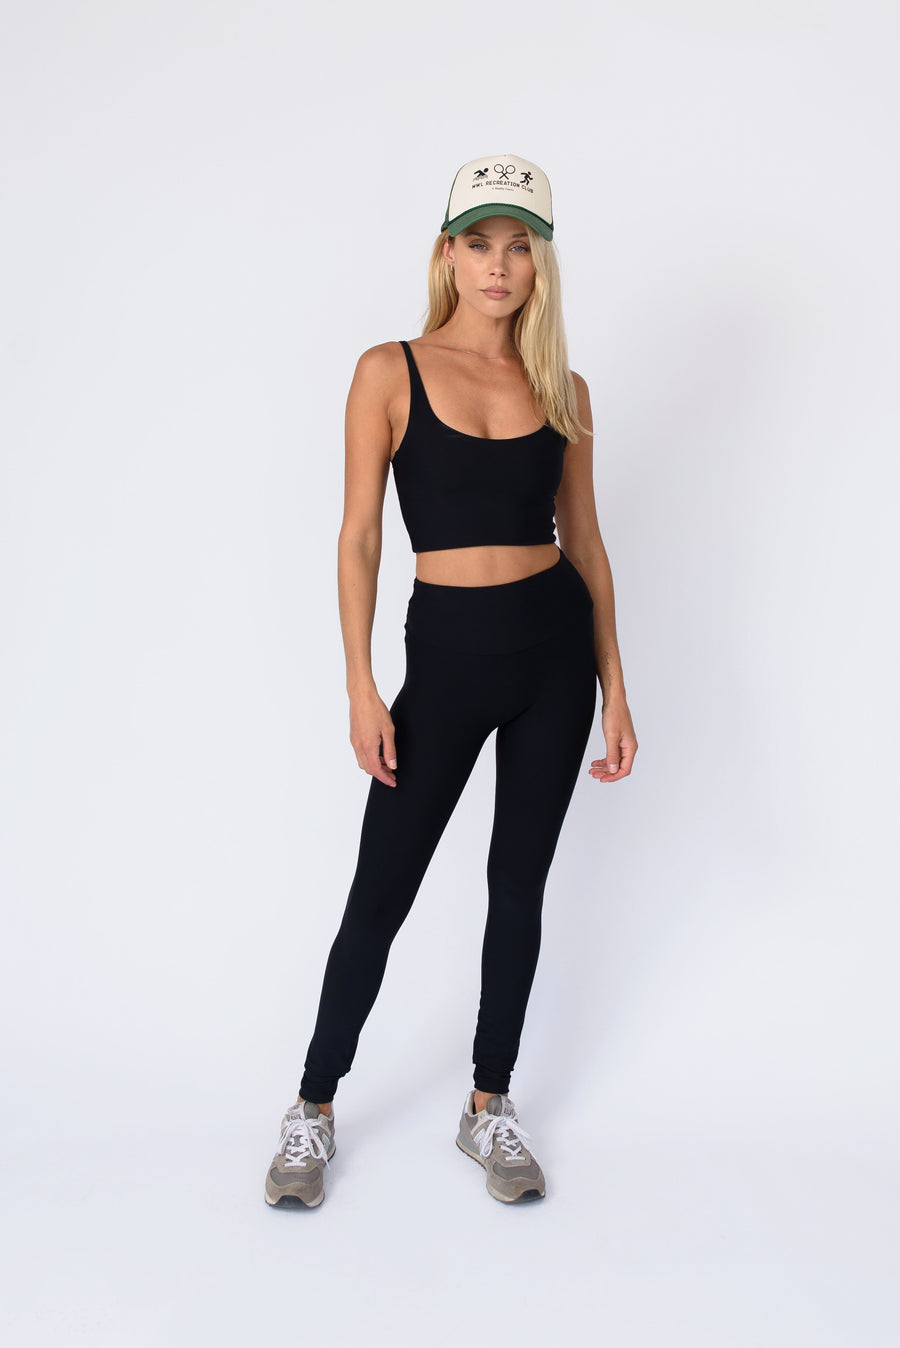 Tiqkatyck Leggings for Women Clearance, Clearance Sales Today Deals Prime,  Women Custom Valentine's Day Printed Leggings, Running Pilates Sweatpants